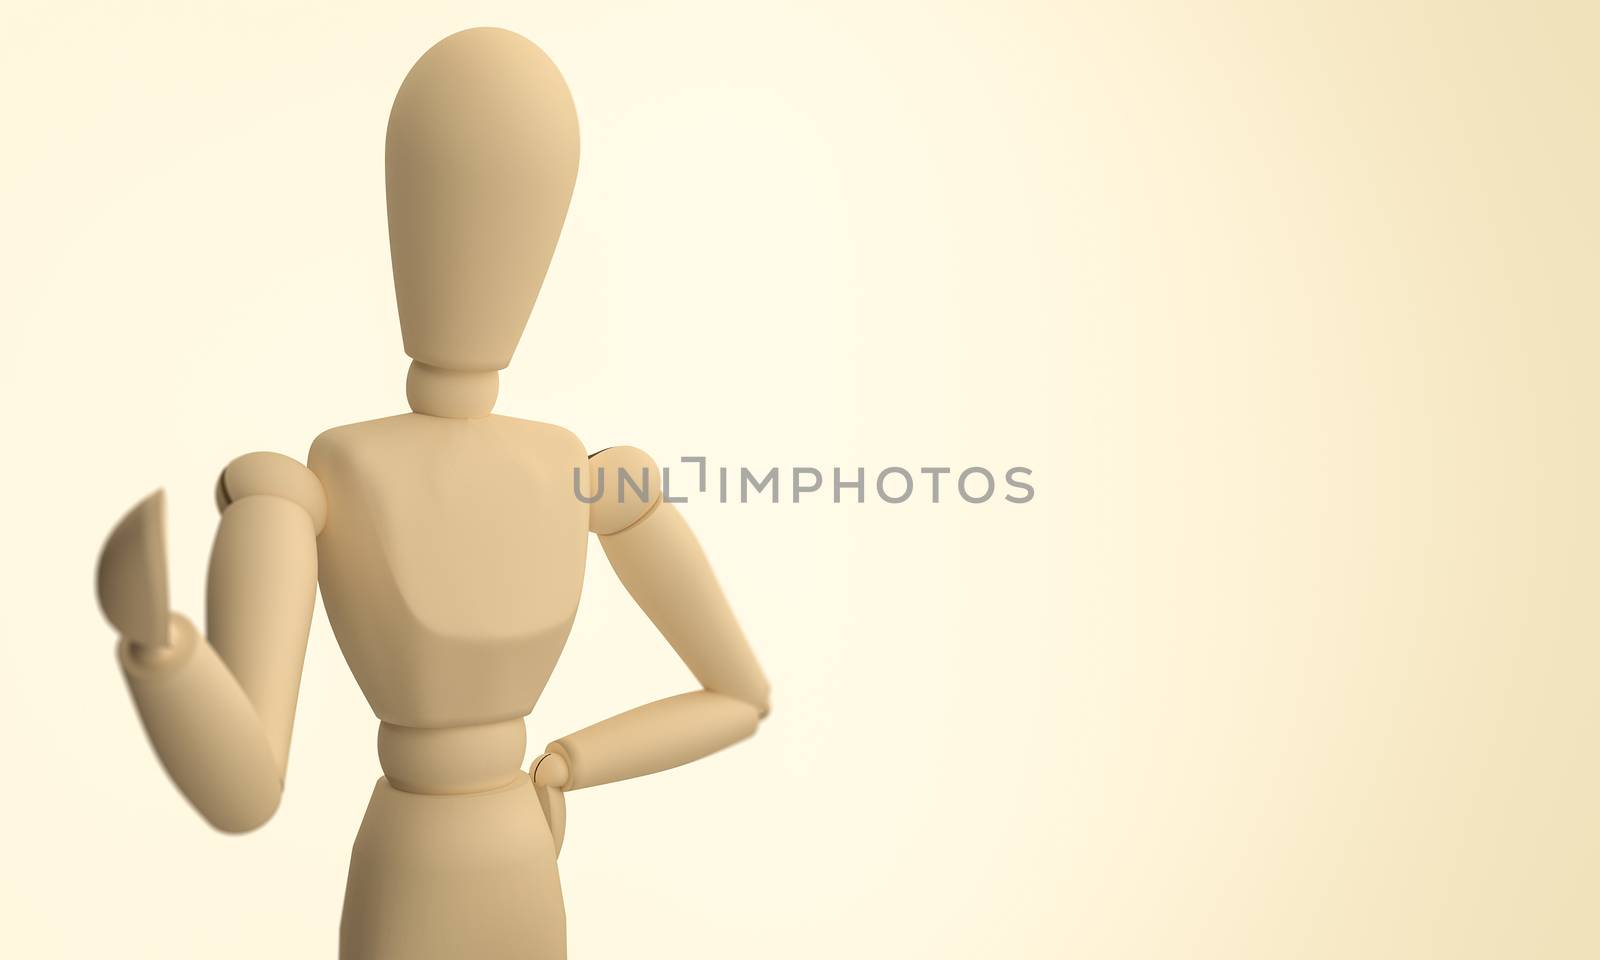 A CGI image of a wooden mannequin posing on a light brown background.